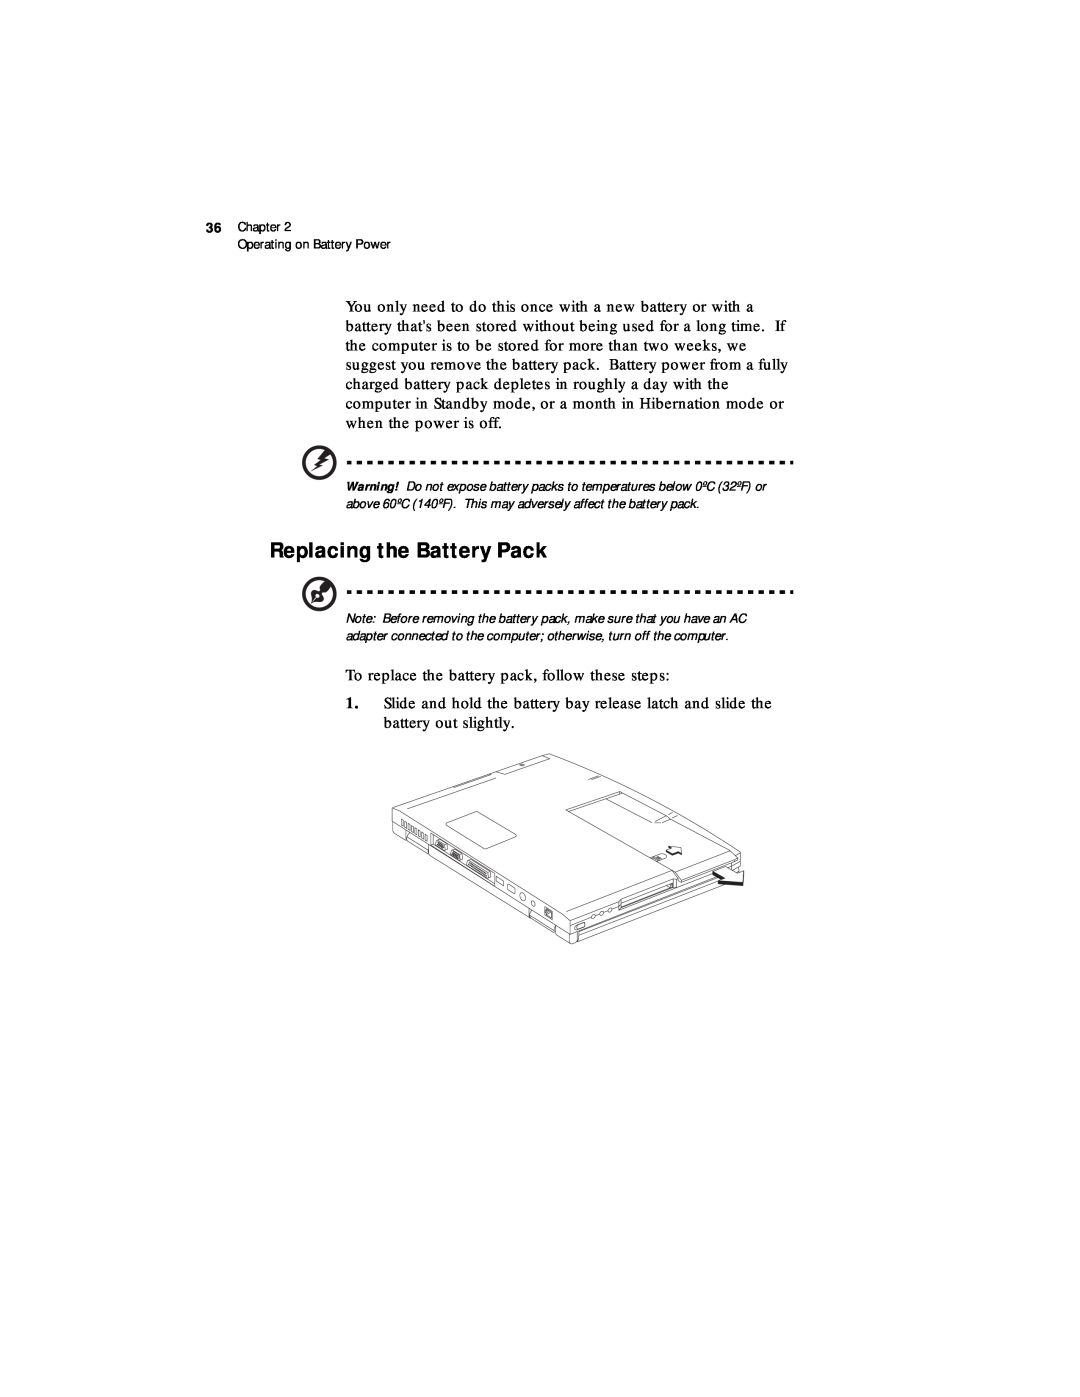 Acer 330 Series manual Replacing the Battery Pack 